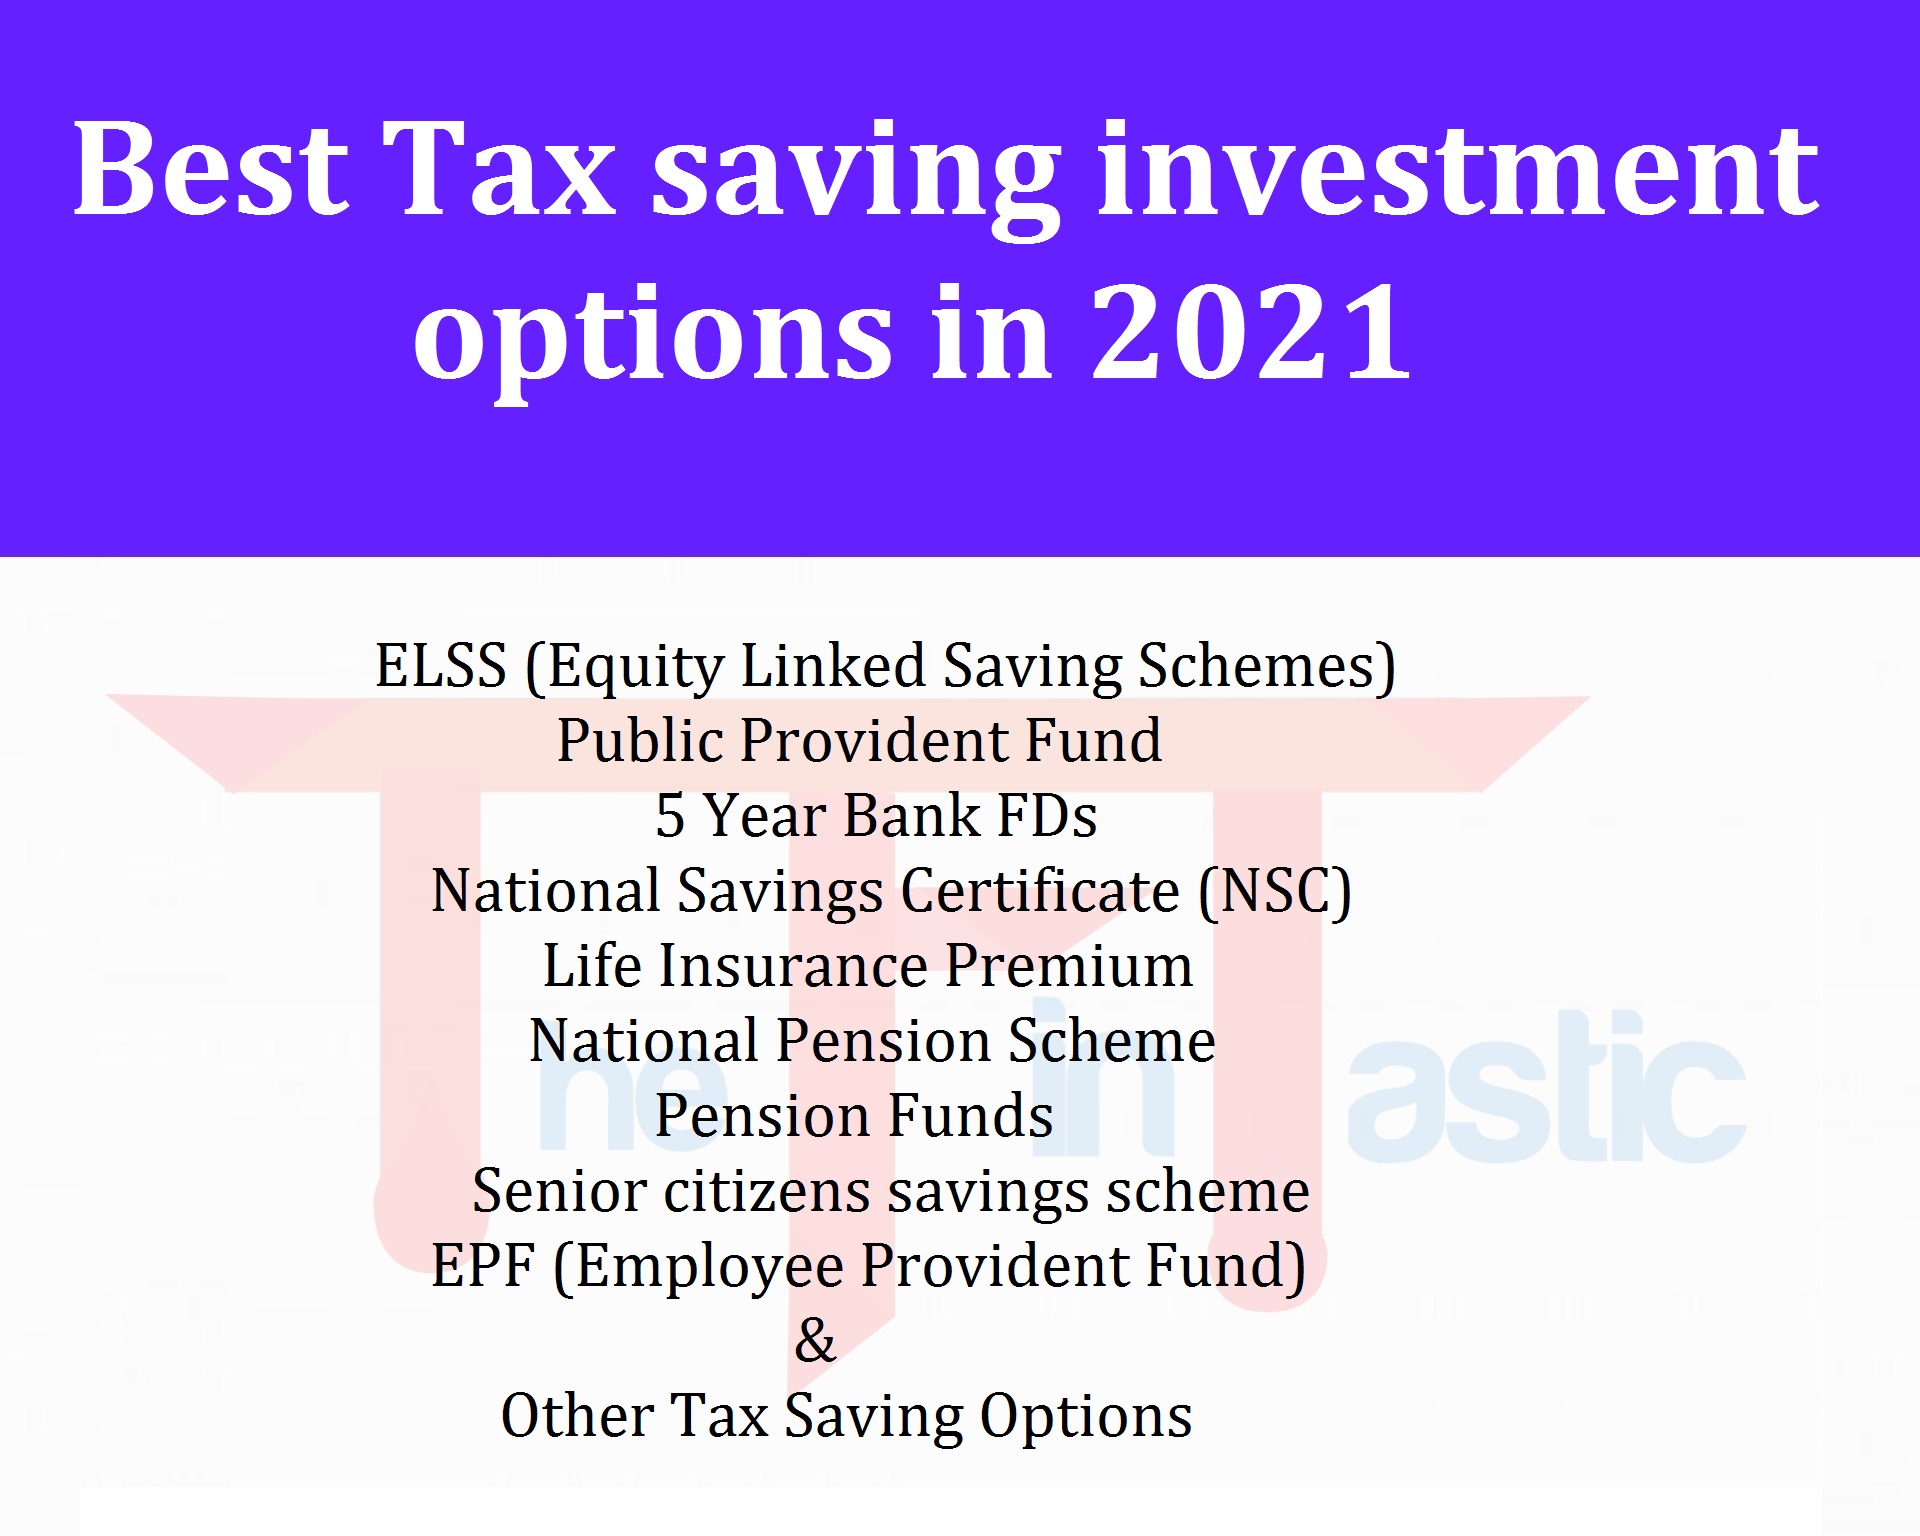 10 Best Tax Saving Investment options in 2021